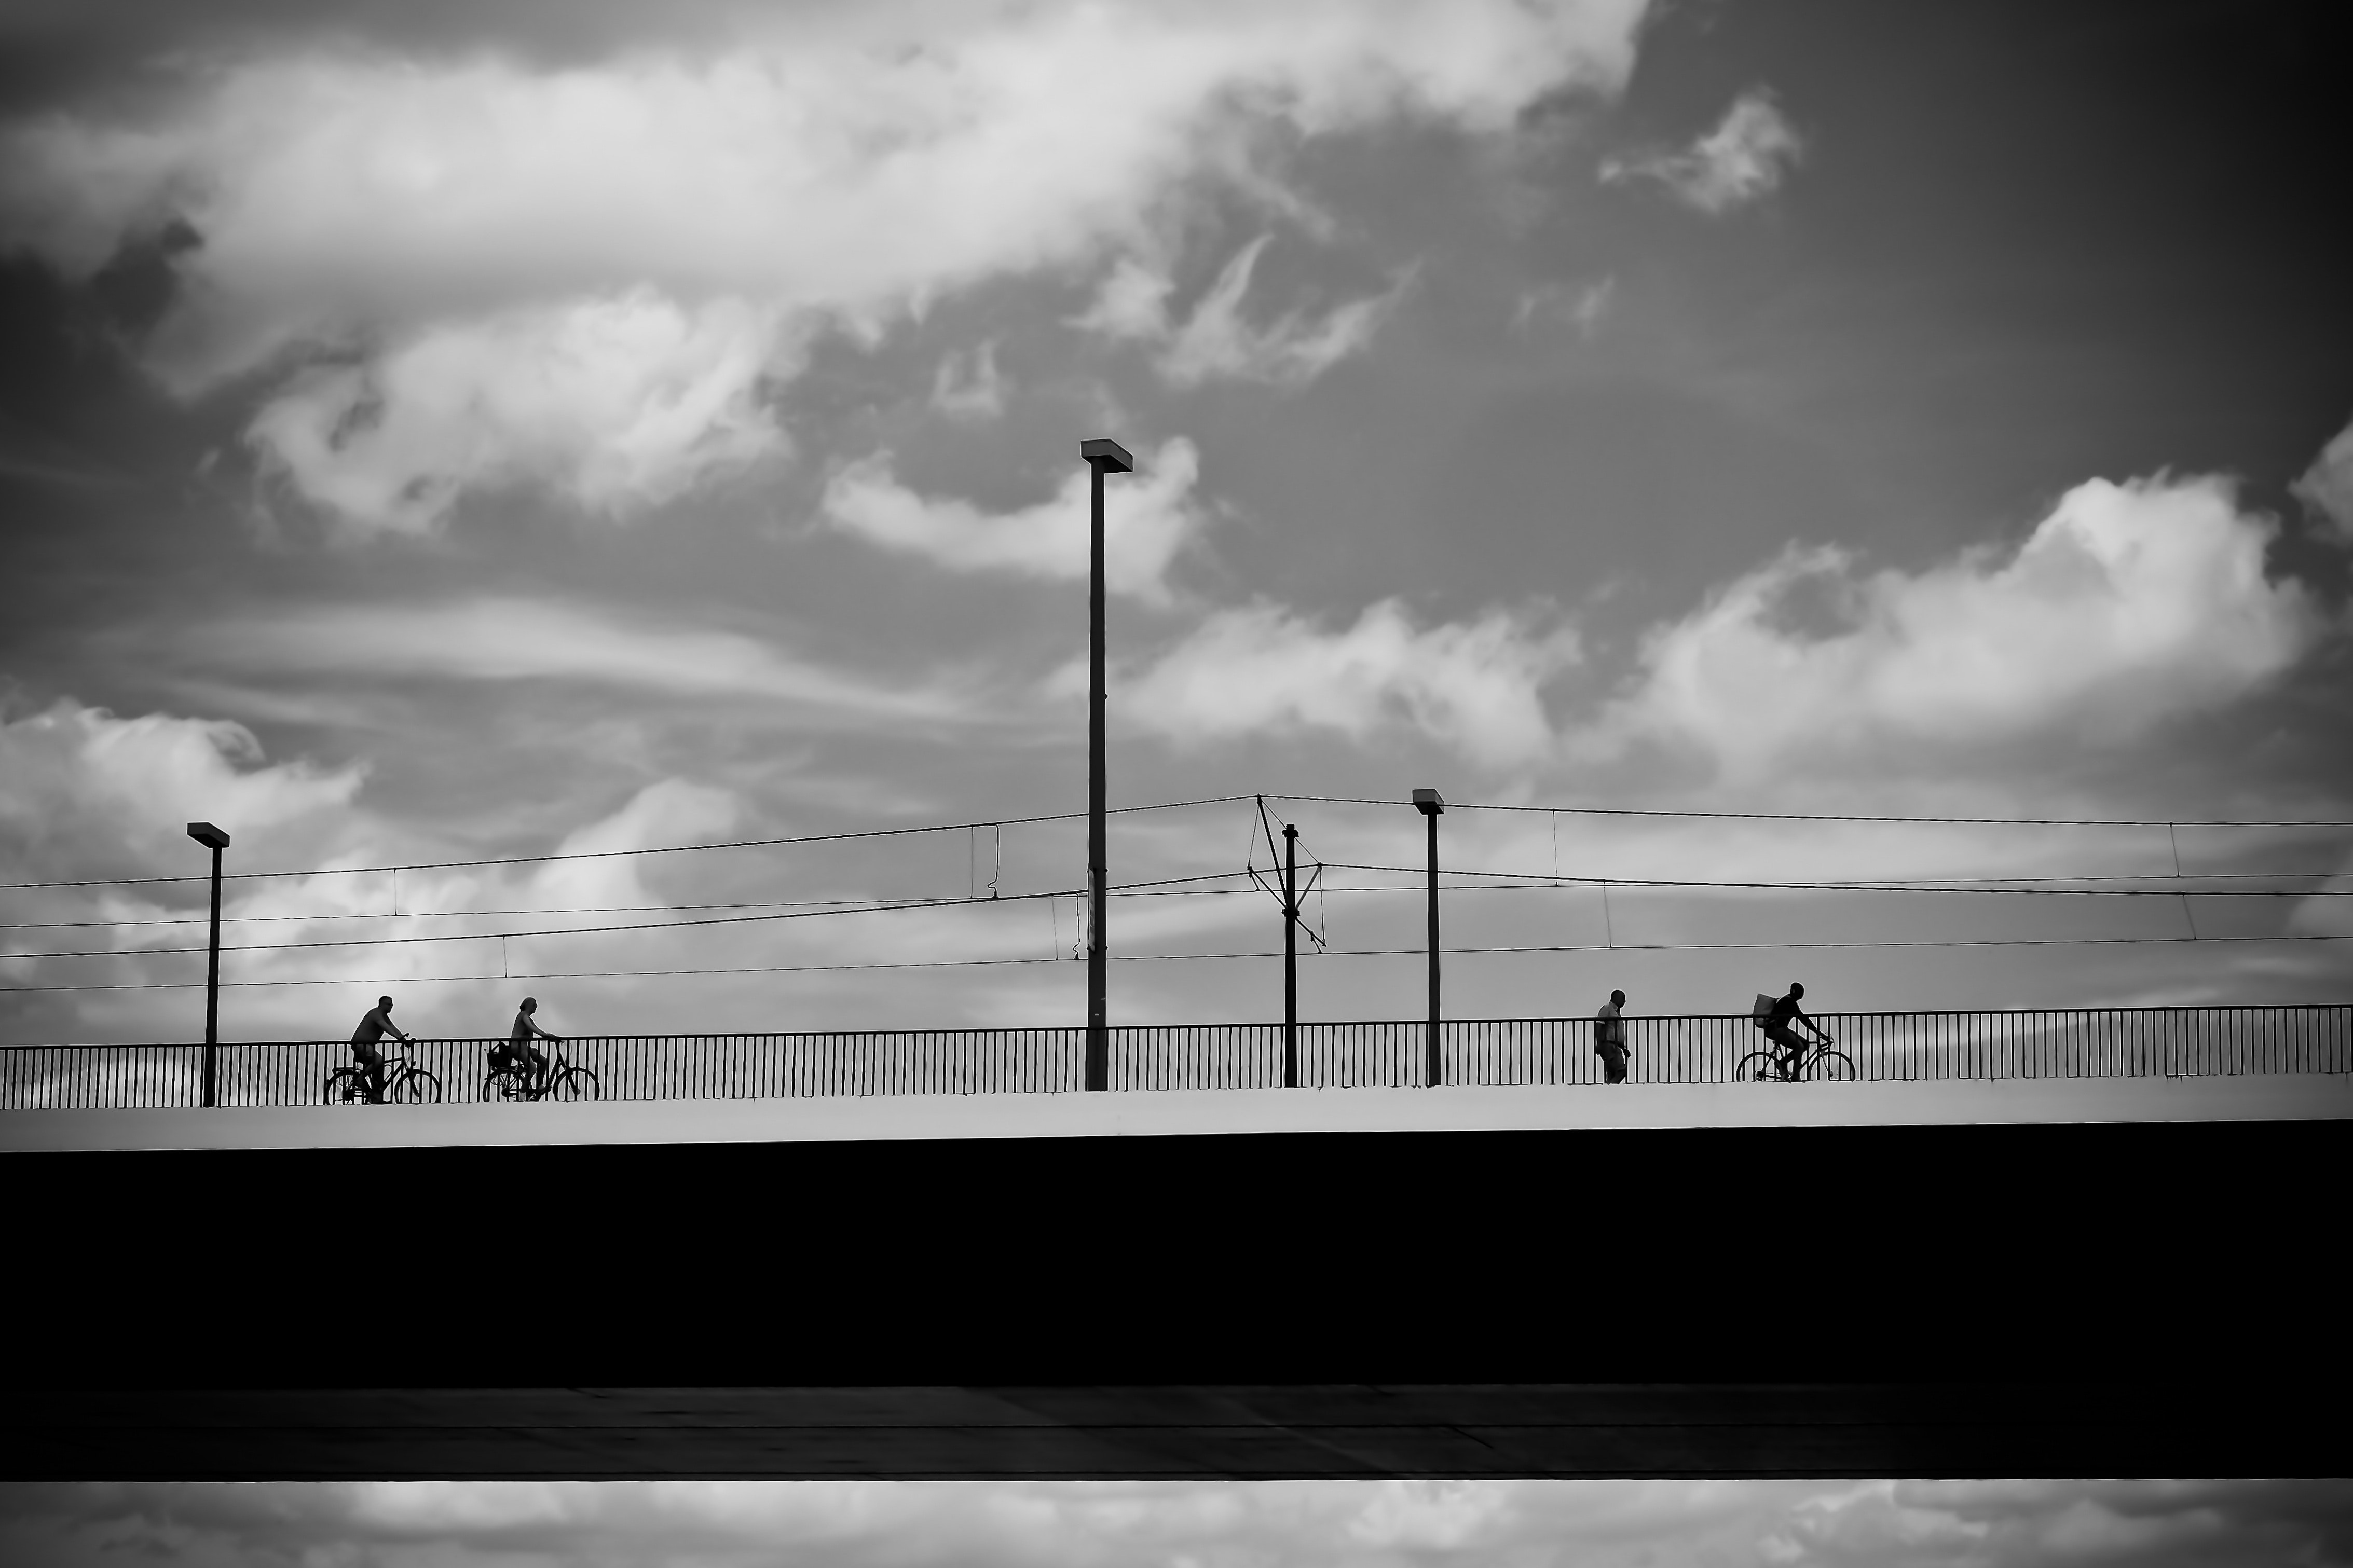 People riding on bicycle during daytime photo